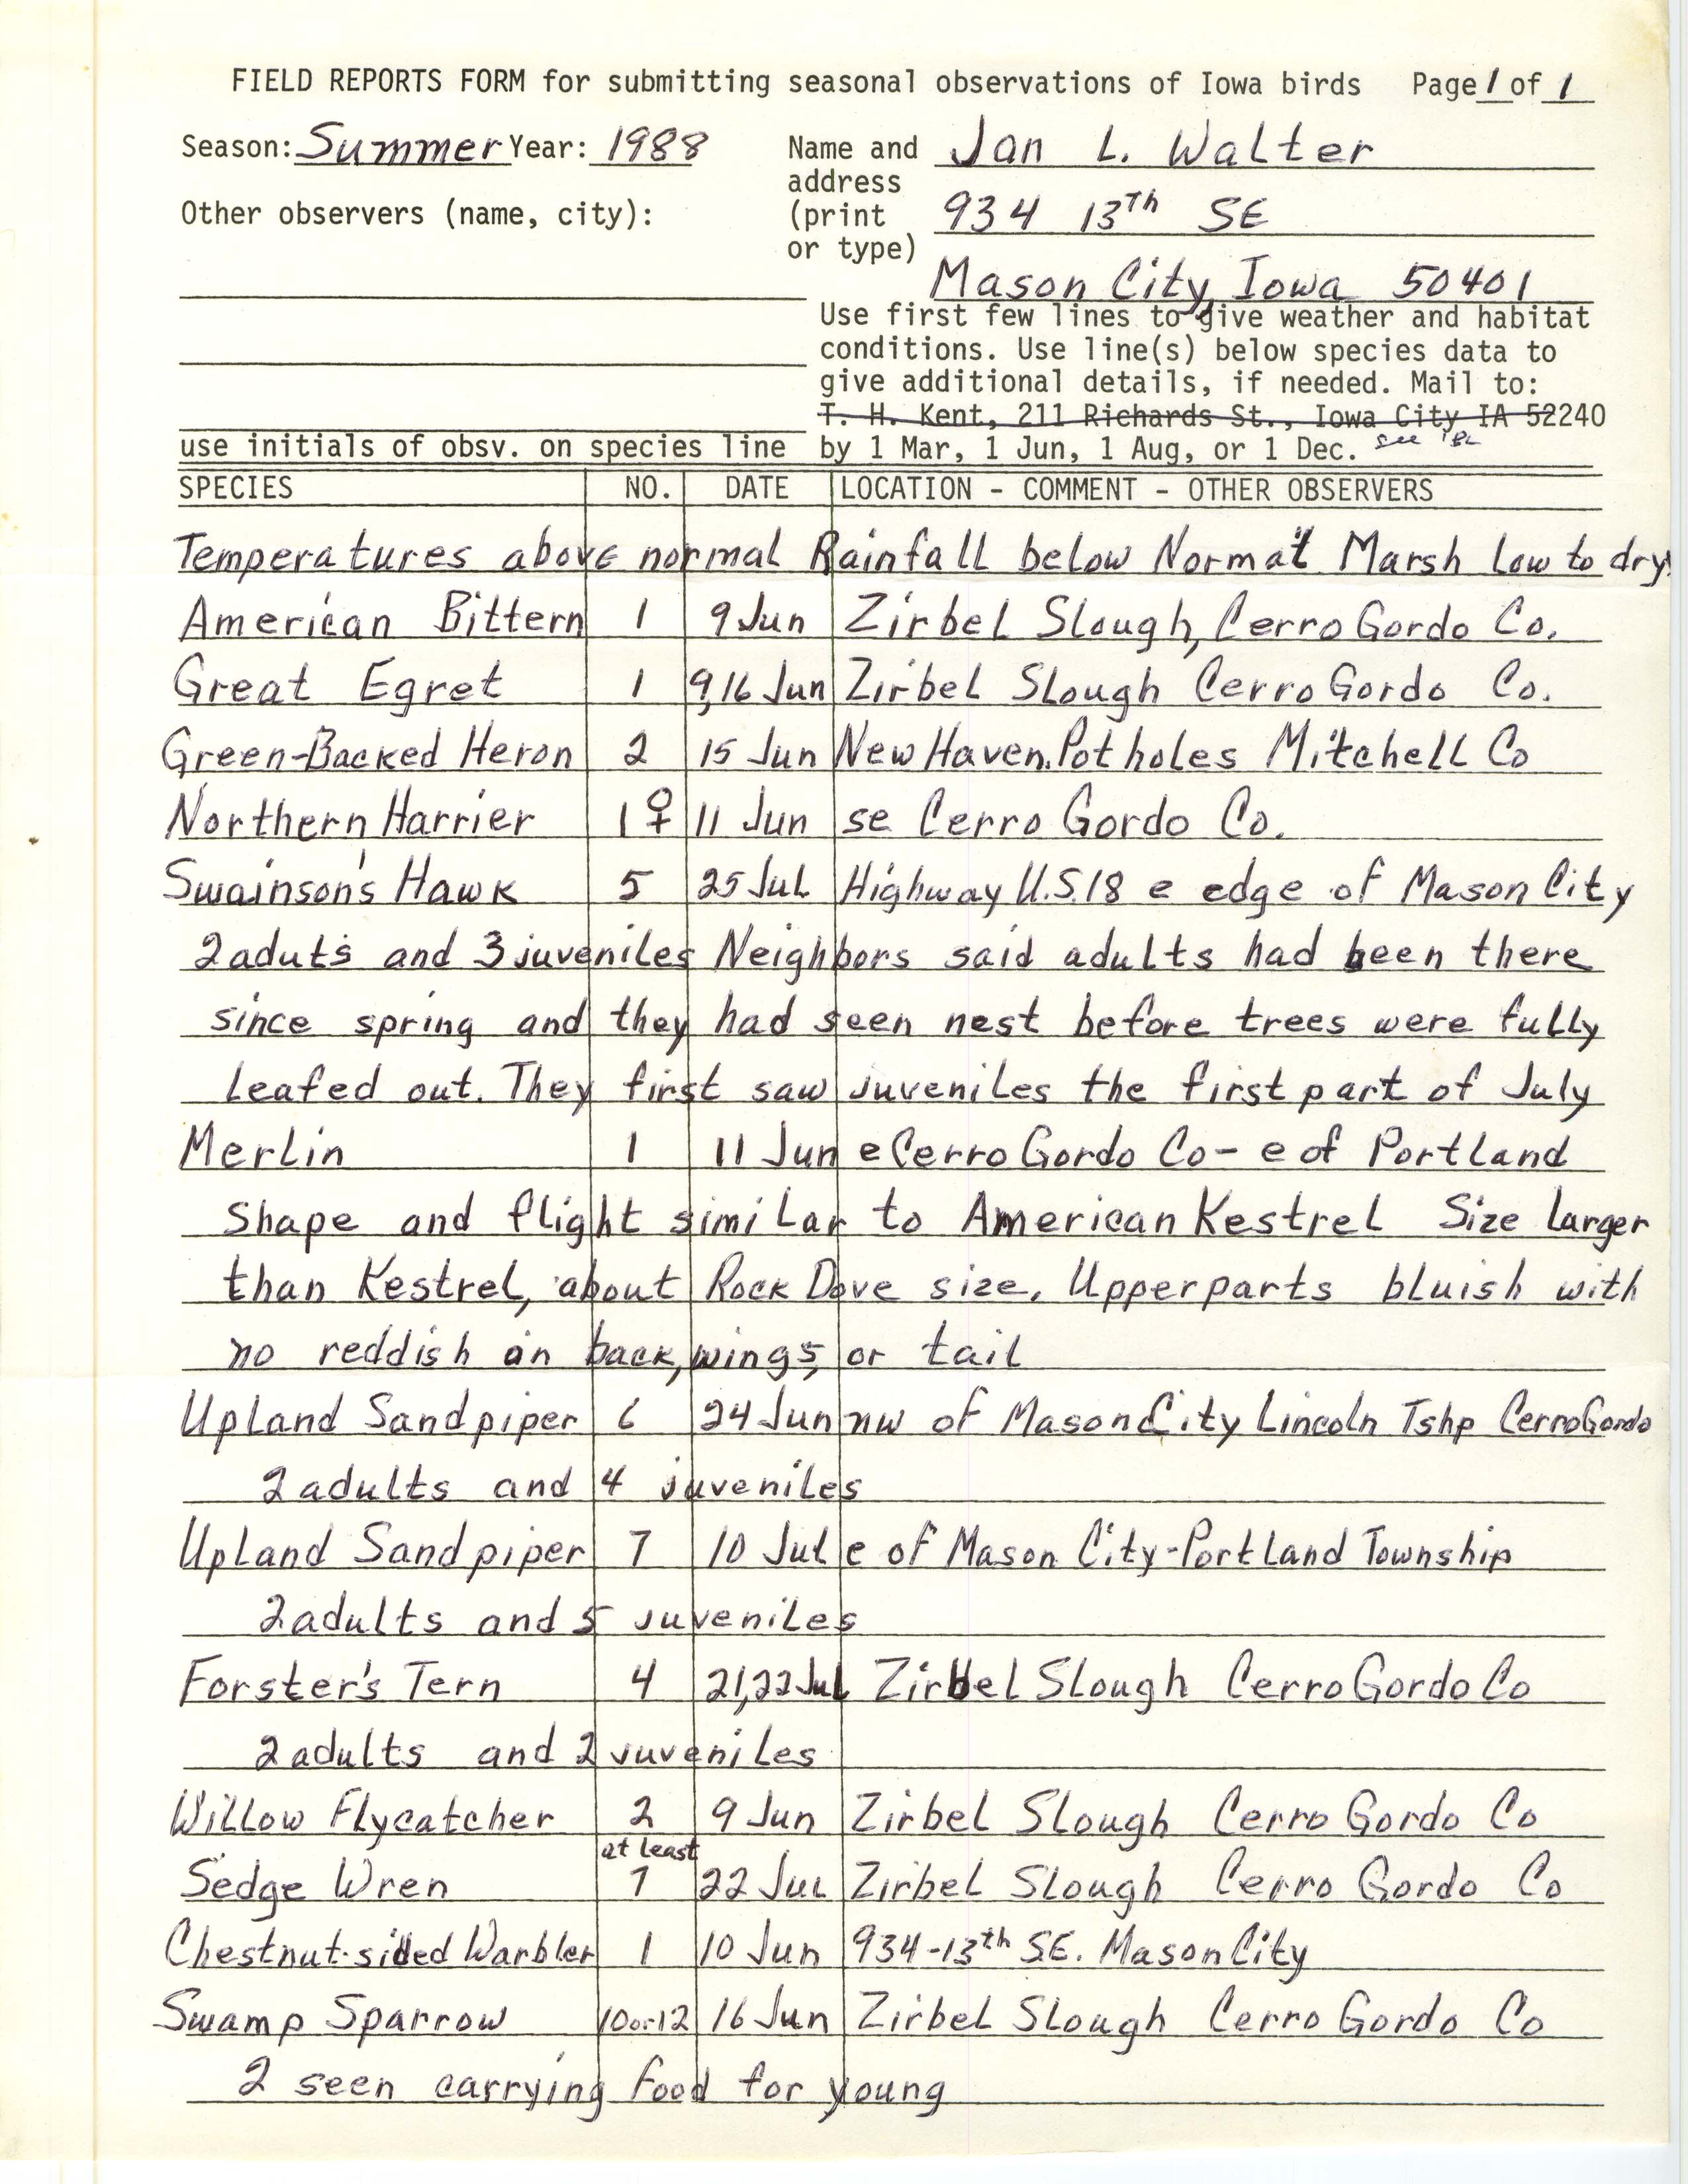 Field reports form for submitting seasonal observations of Iowa birds, Jan L. Walter, summer 1988